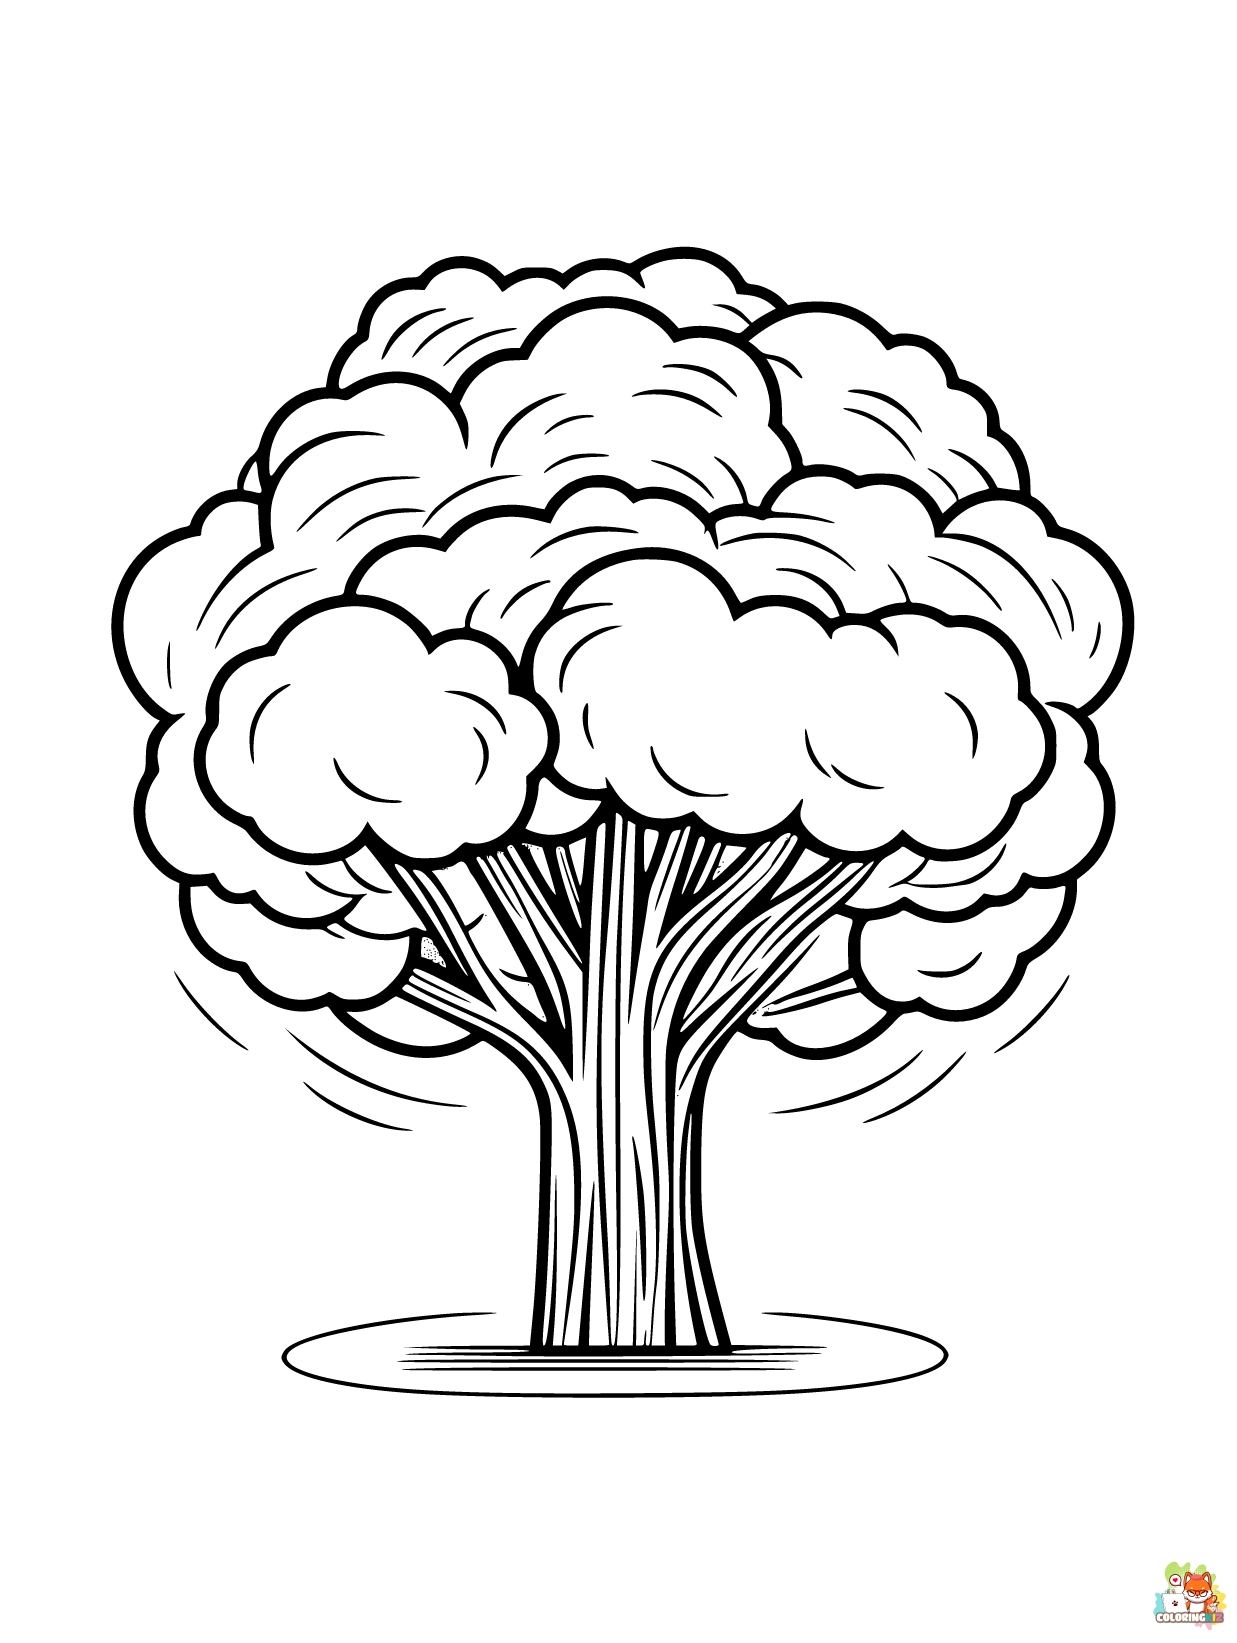 Tree coloring pages 2